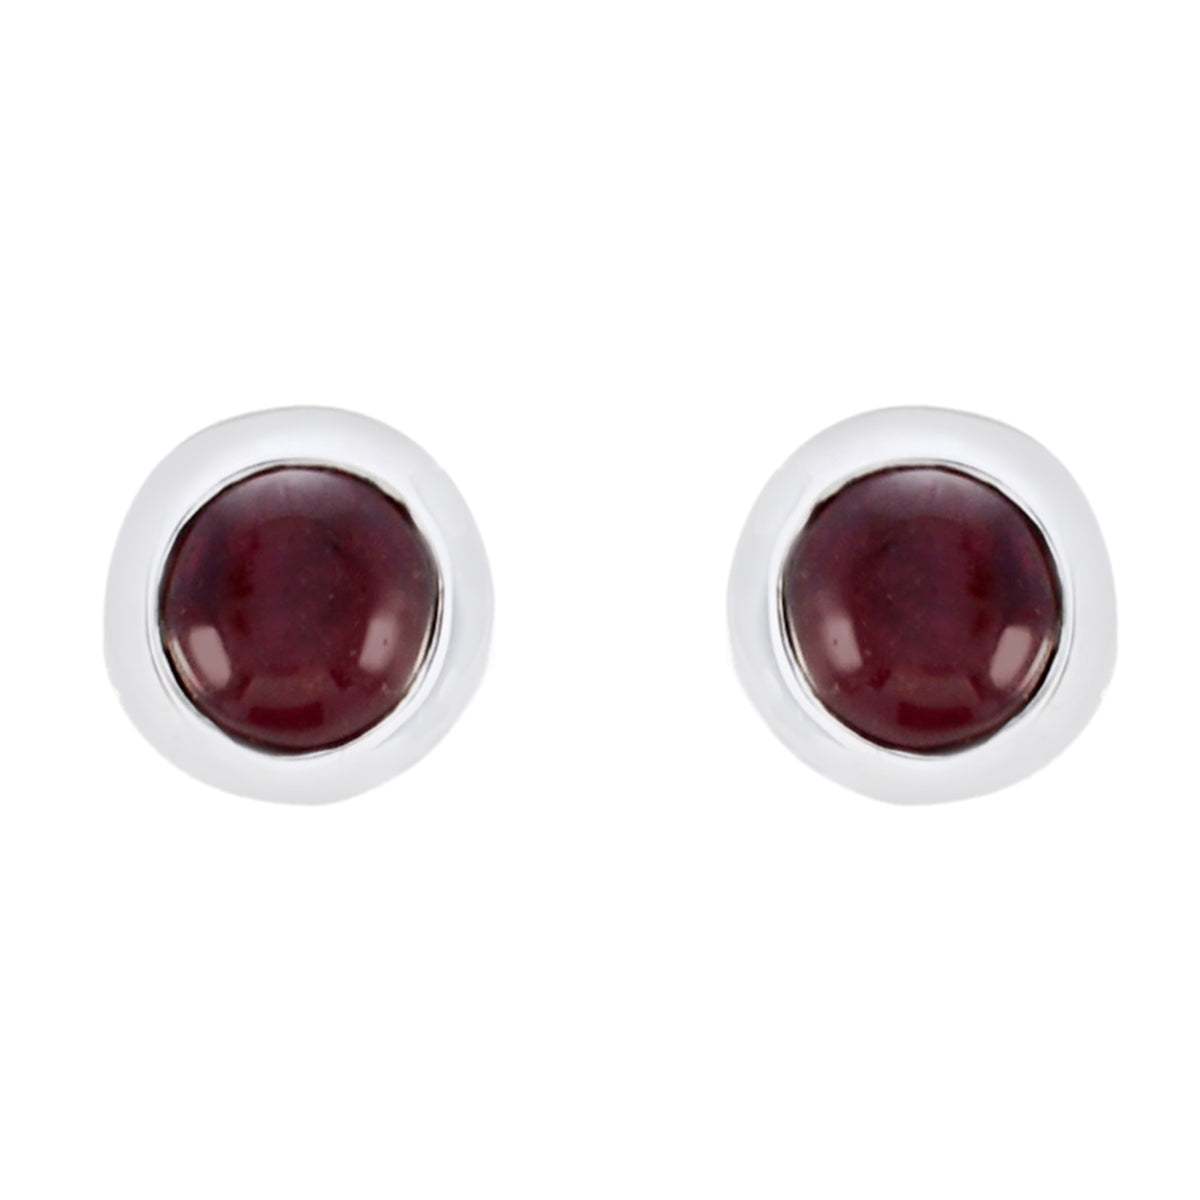 Riyo Real Gemstones round Cabochon Red Garnet Silver Earring gift for mother